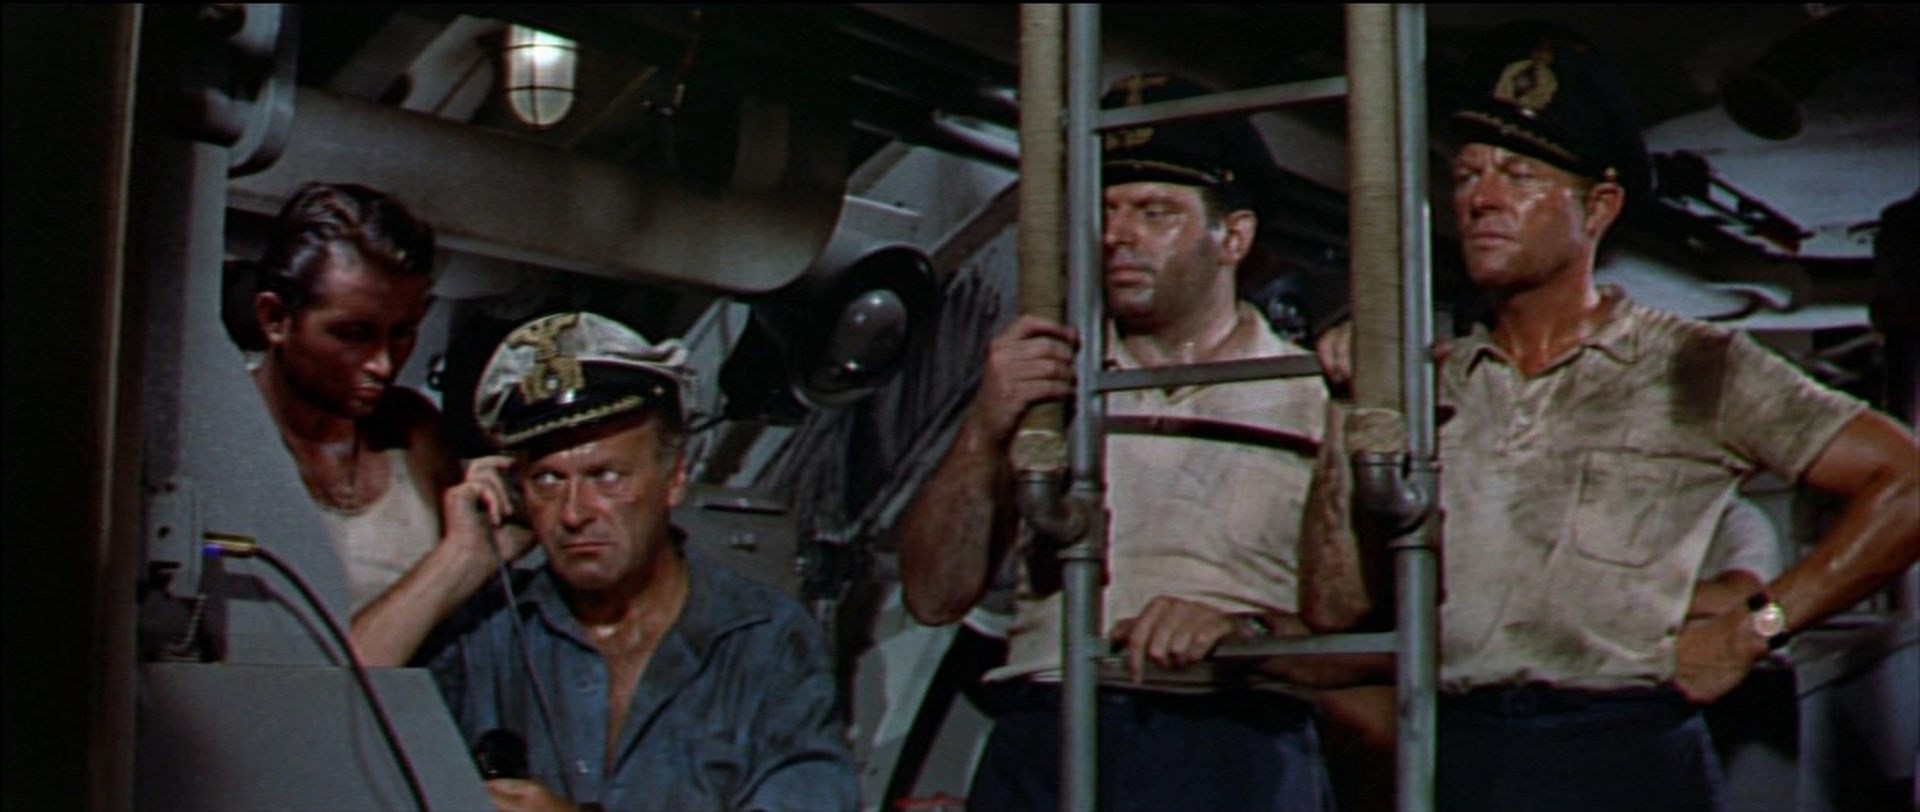 Bridge of a German submarine: Curd Jürgens as captain with a tense look in the presence of three submariners, all sweaty and oily.